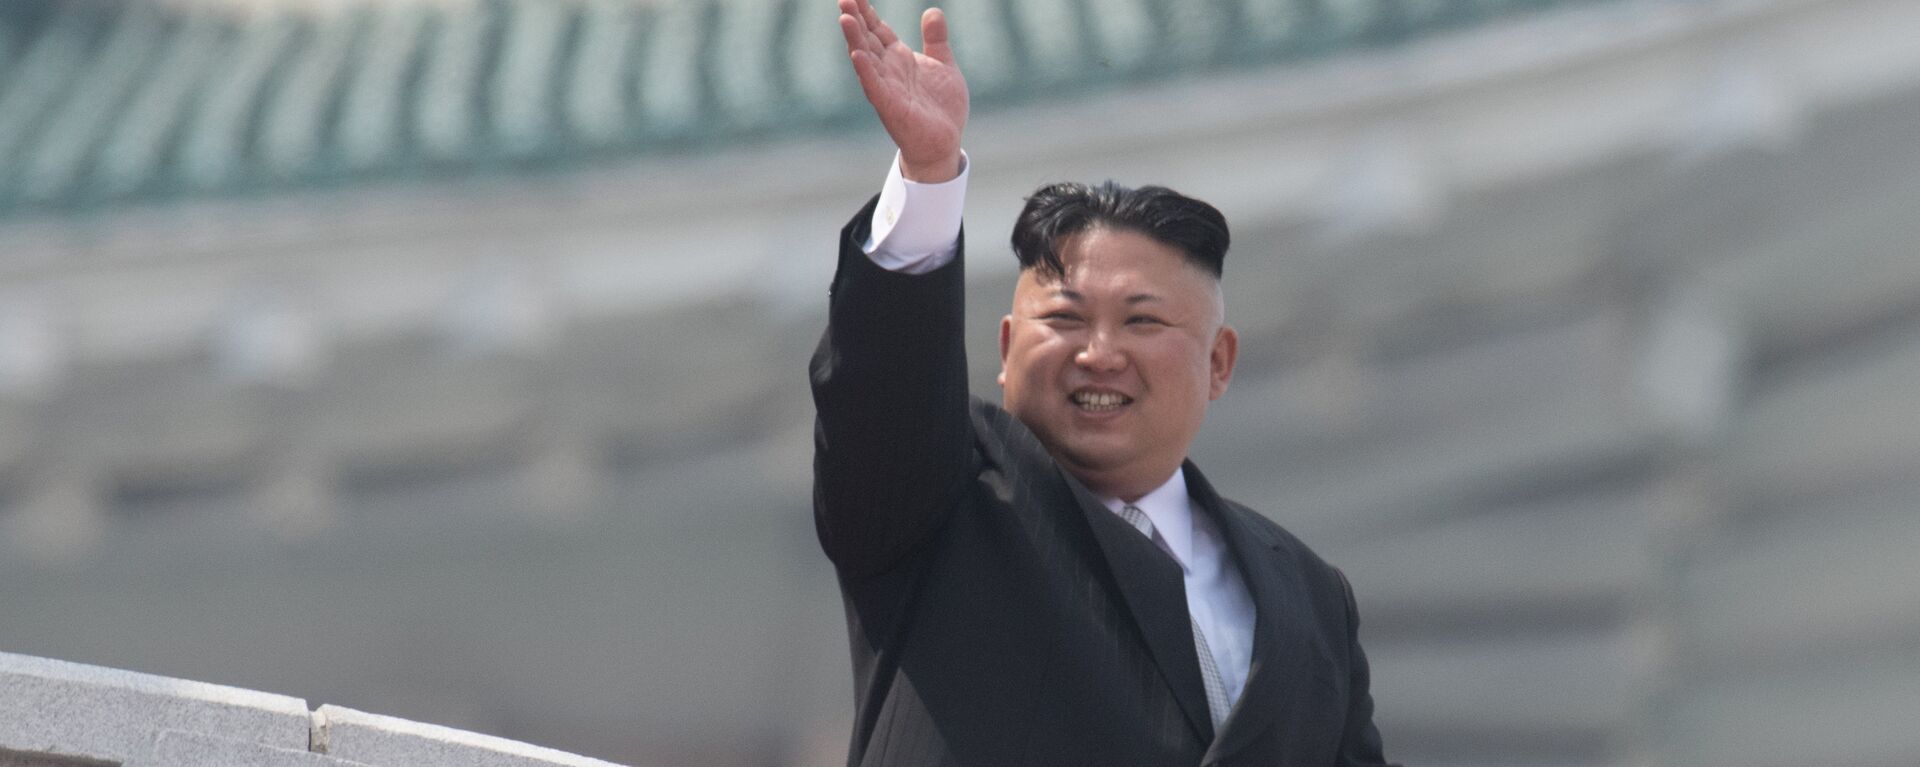 North Korean leader Kim Jong-un during a military parade marking the 105th birthday of Kim Il-Sung, the founder of North Korea, in Pyongyang - Sputnik International, 1920, 30.04.2022